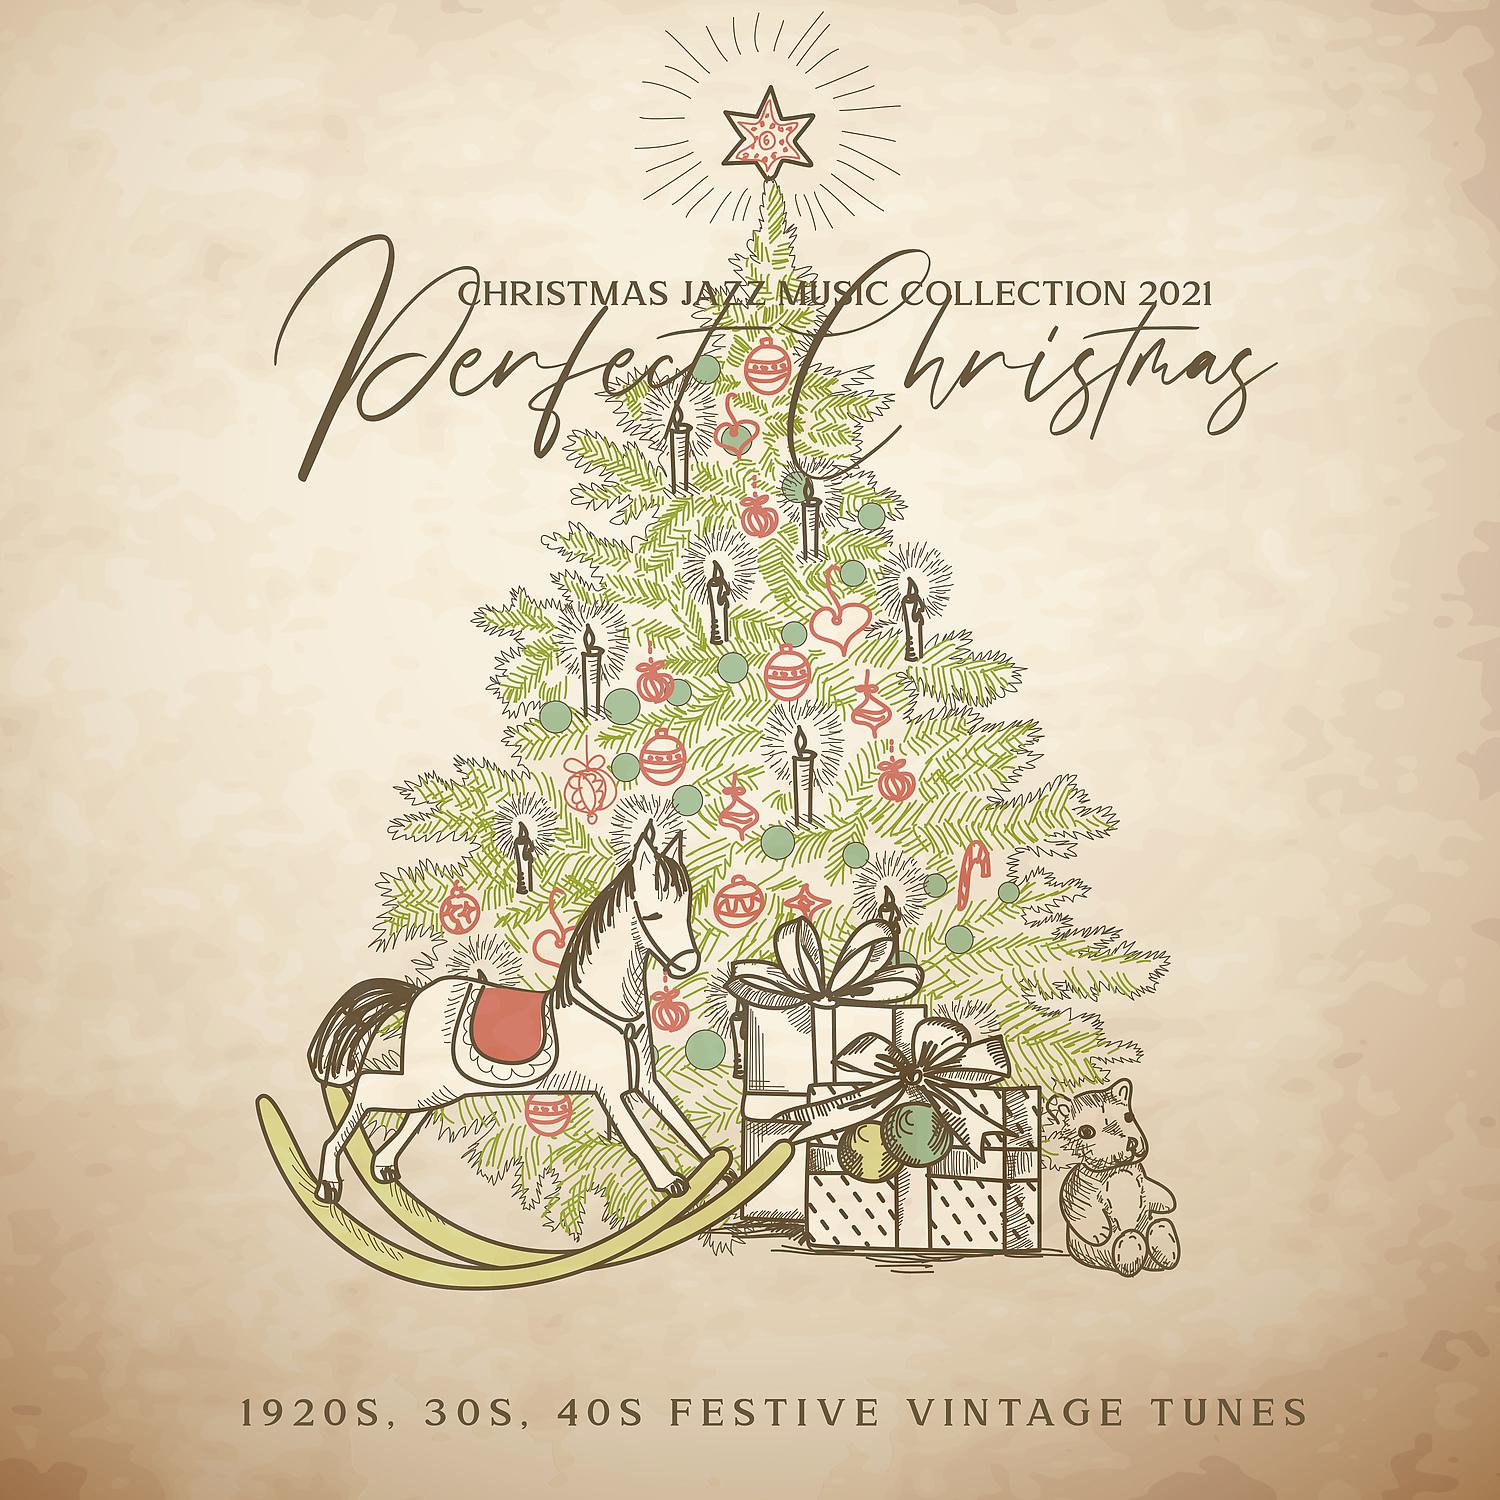 Постер альбома Christmas Jazz Music Collection 2021: Perfect Christmas - 1920s, 30s, 40s Festive Vintage Tunes, Julenissen Xmas Band of the 40s, 1930's Vintage Christmas Music Mix